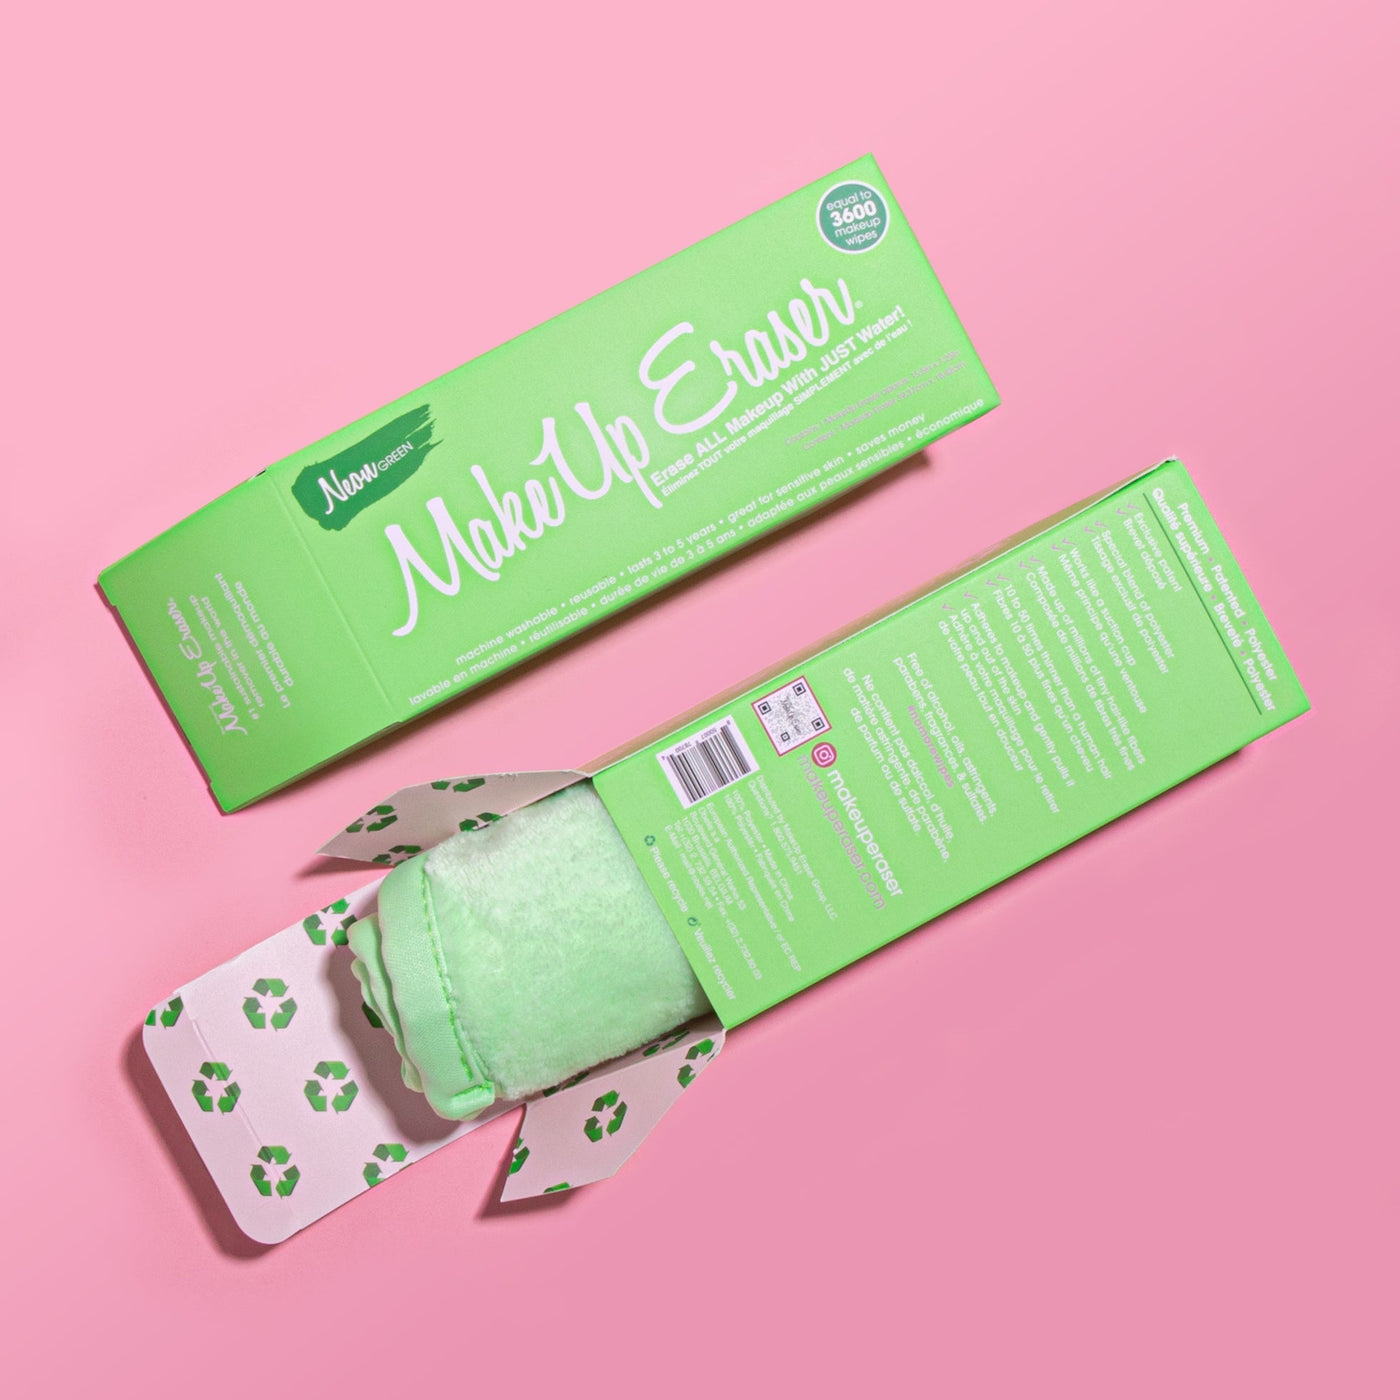 THE ORIGINAL MAKEUP ERASER (Neon Green) - Youngblood Mineral Cosmetics